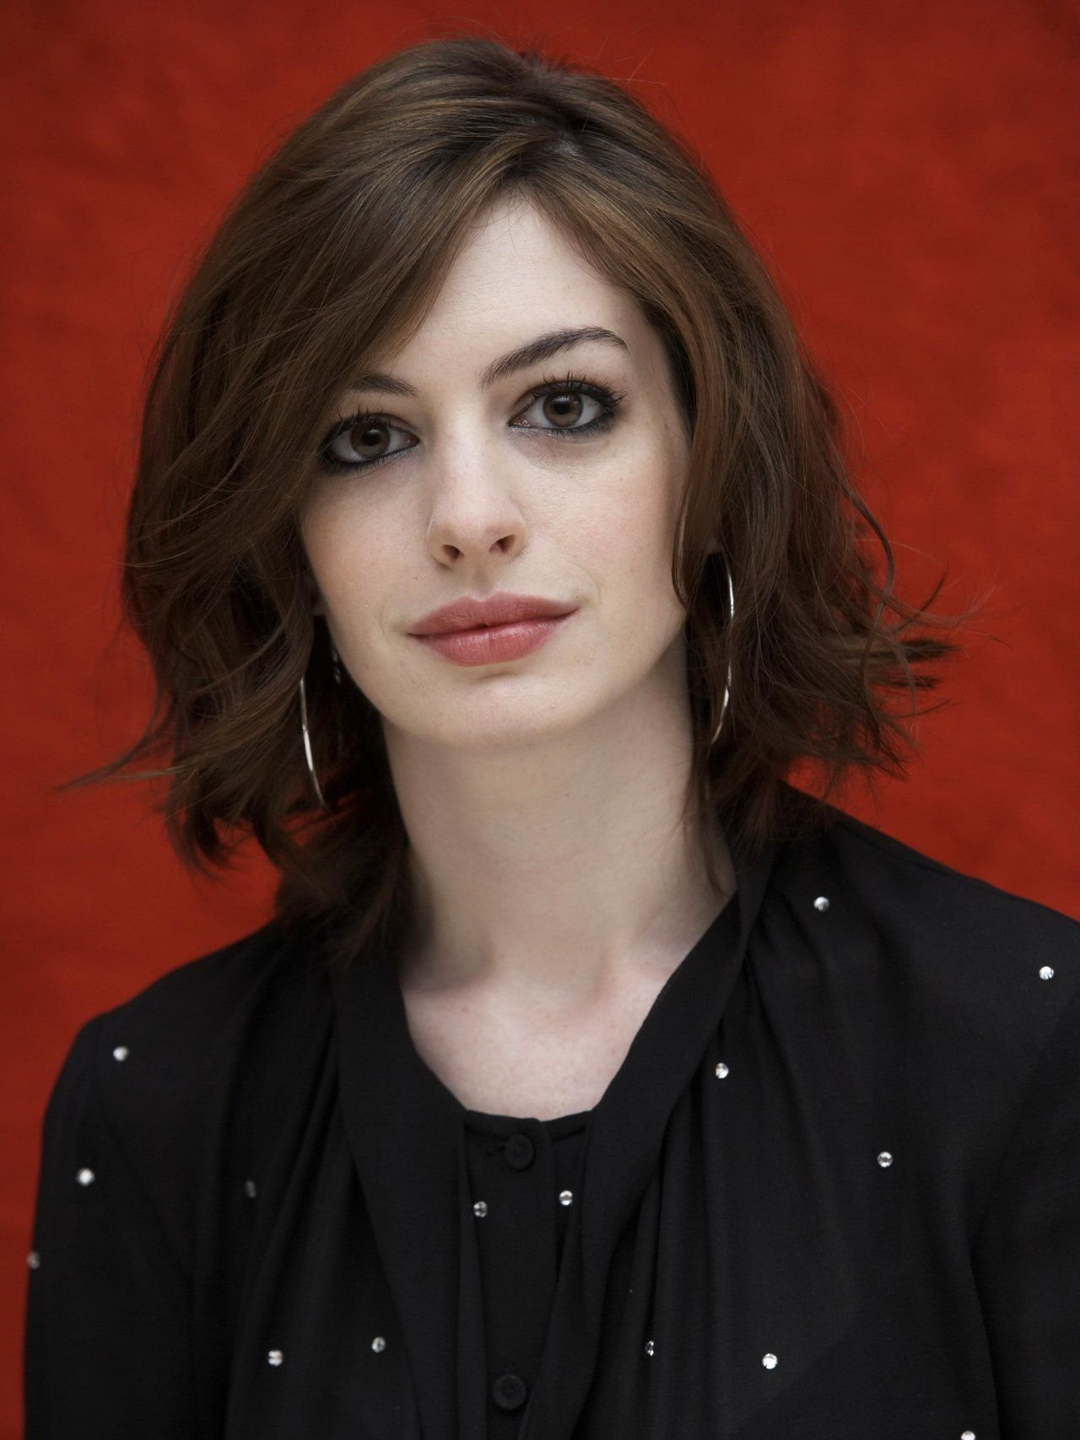 Anne Hathaway who is she